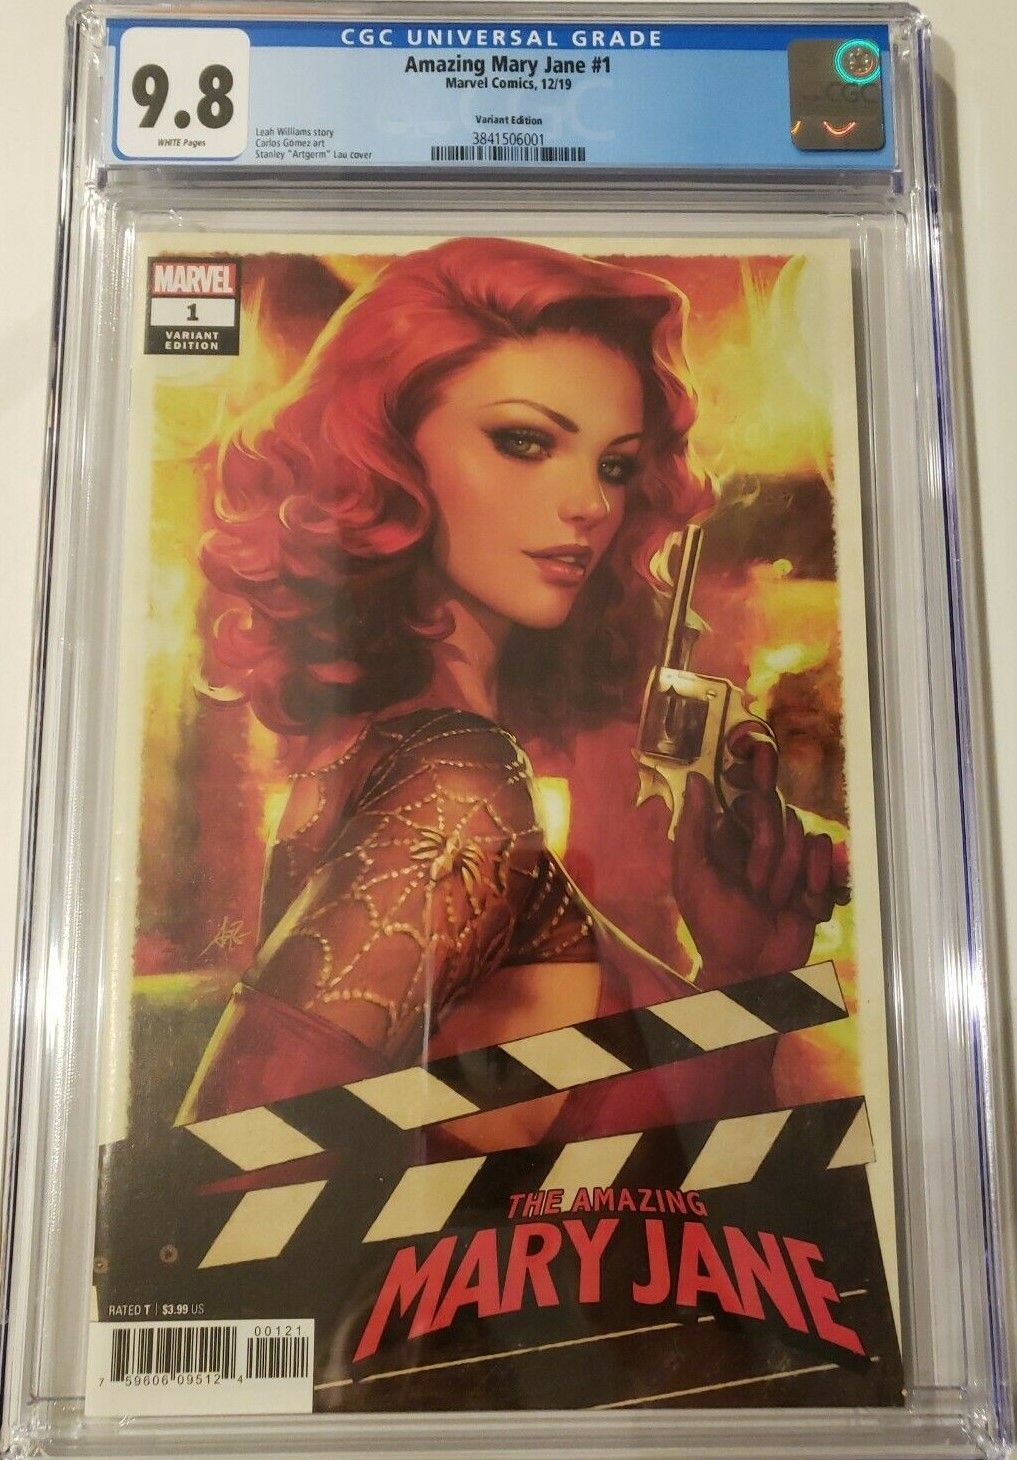 Null MARVEL, Amazing Mary Jane#1, CGC, published in 2019 at 84 copies in 9.8, by&hellip;